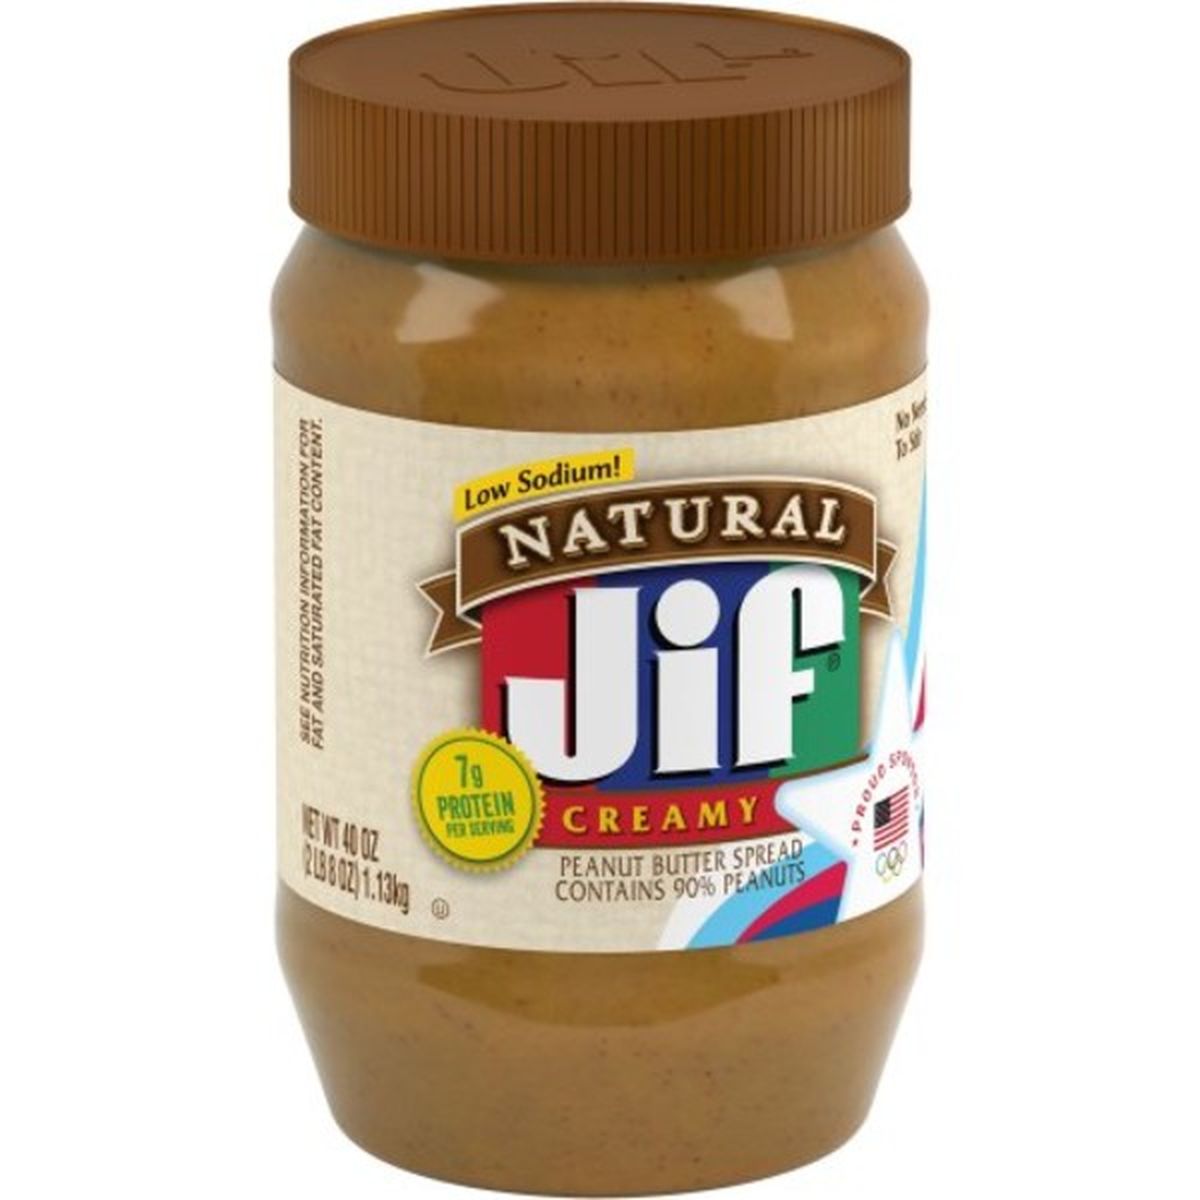 Calories in Jif Natural Peanut Butter Spread